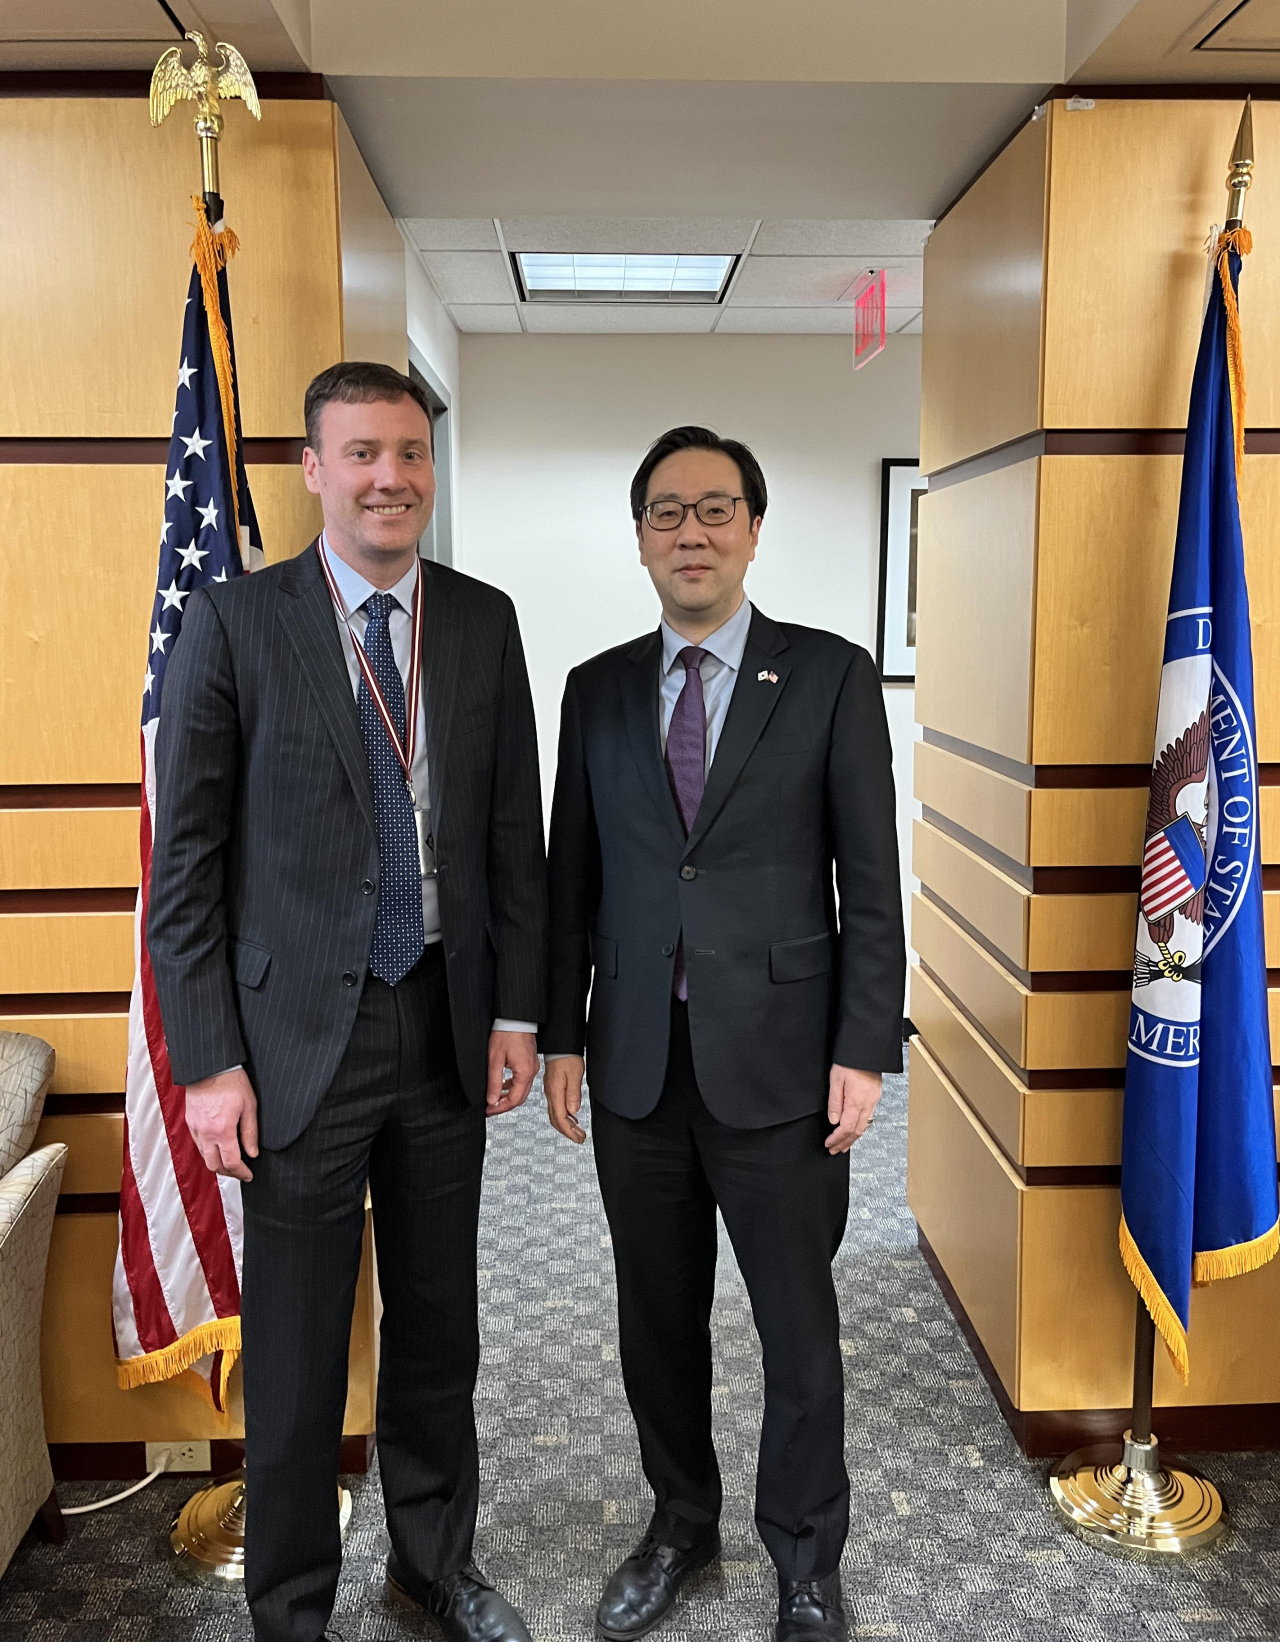 Lee Jun-il (Rignt), South Korea's deputy nuclear envoy, and US Deputy Special Representative for North Korea Lyn Debevoise poses for a photo before the inaugural meeting of the South Korea-US bilateral Enhanced Disruption Task Force on Tuesday. (Yonhap)